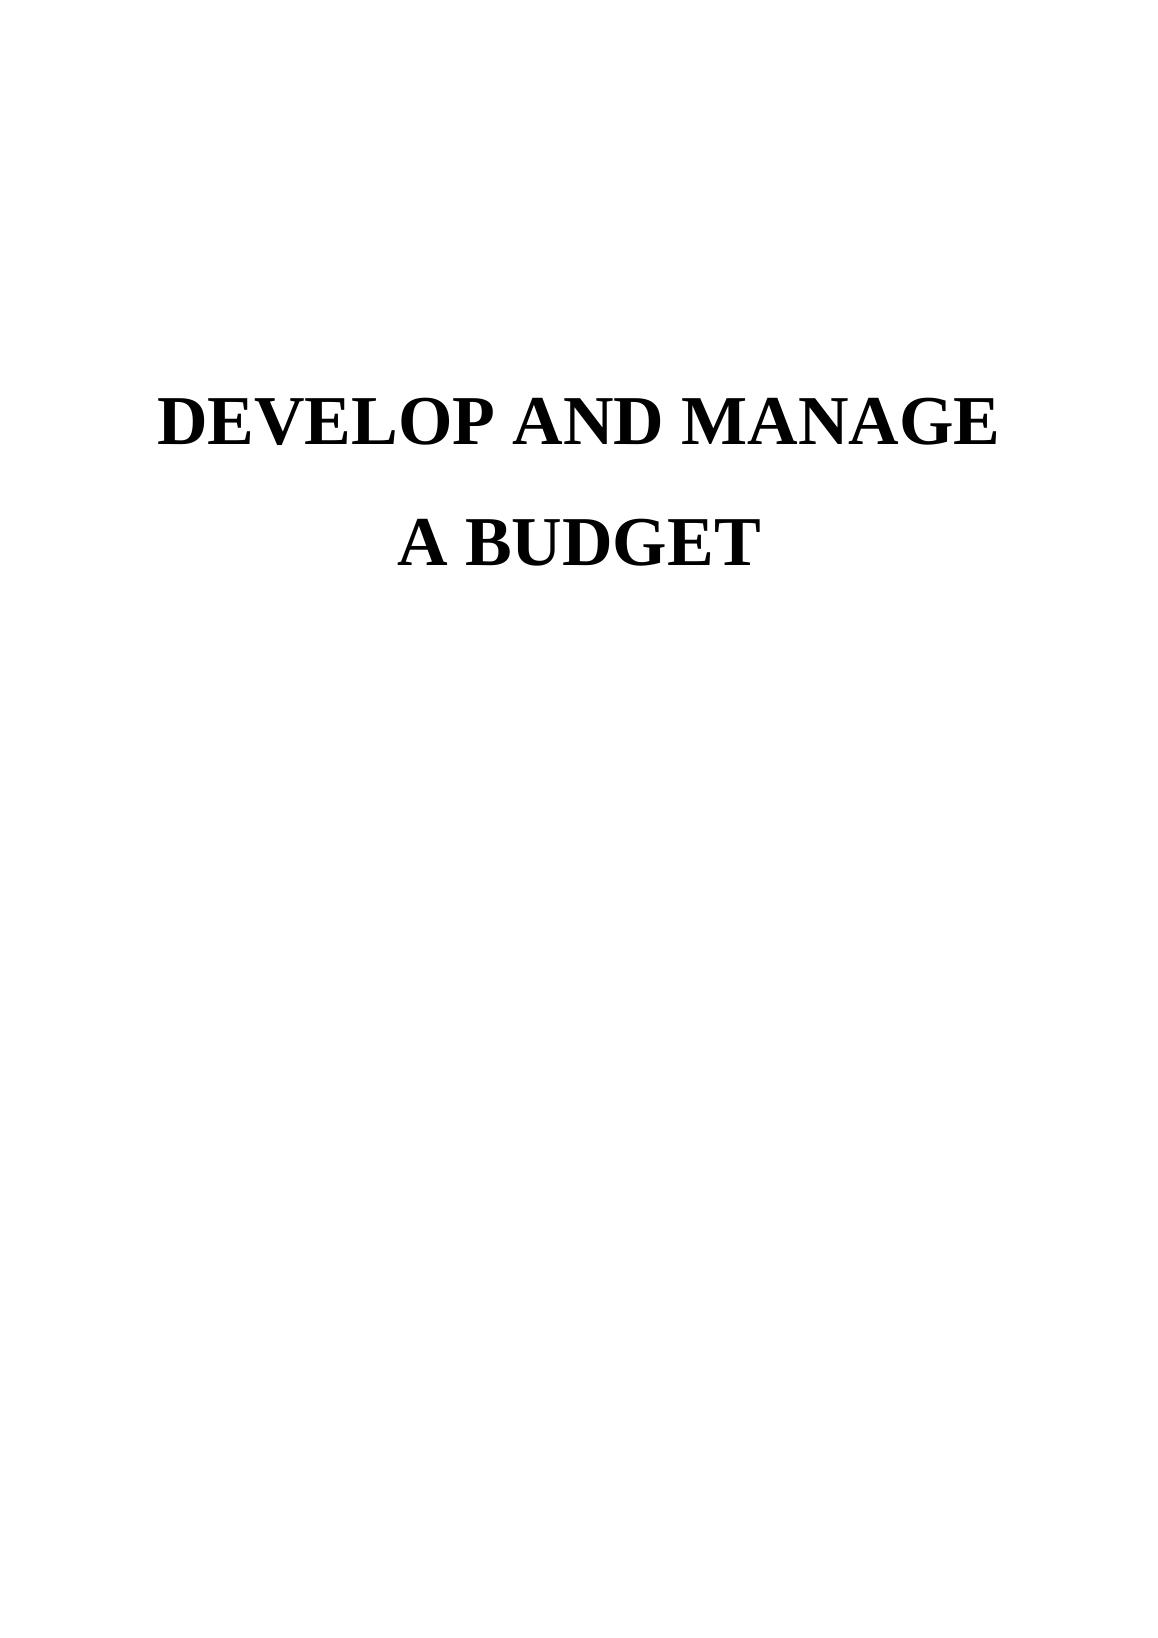 Develop and Manage a Budget_1